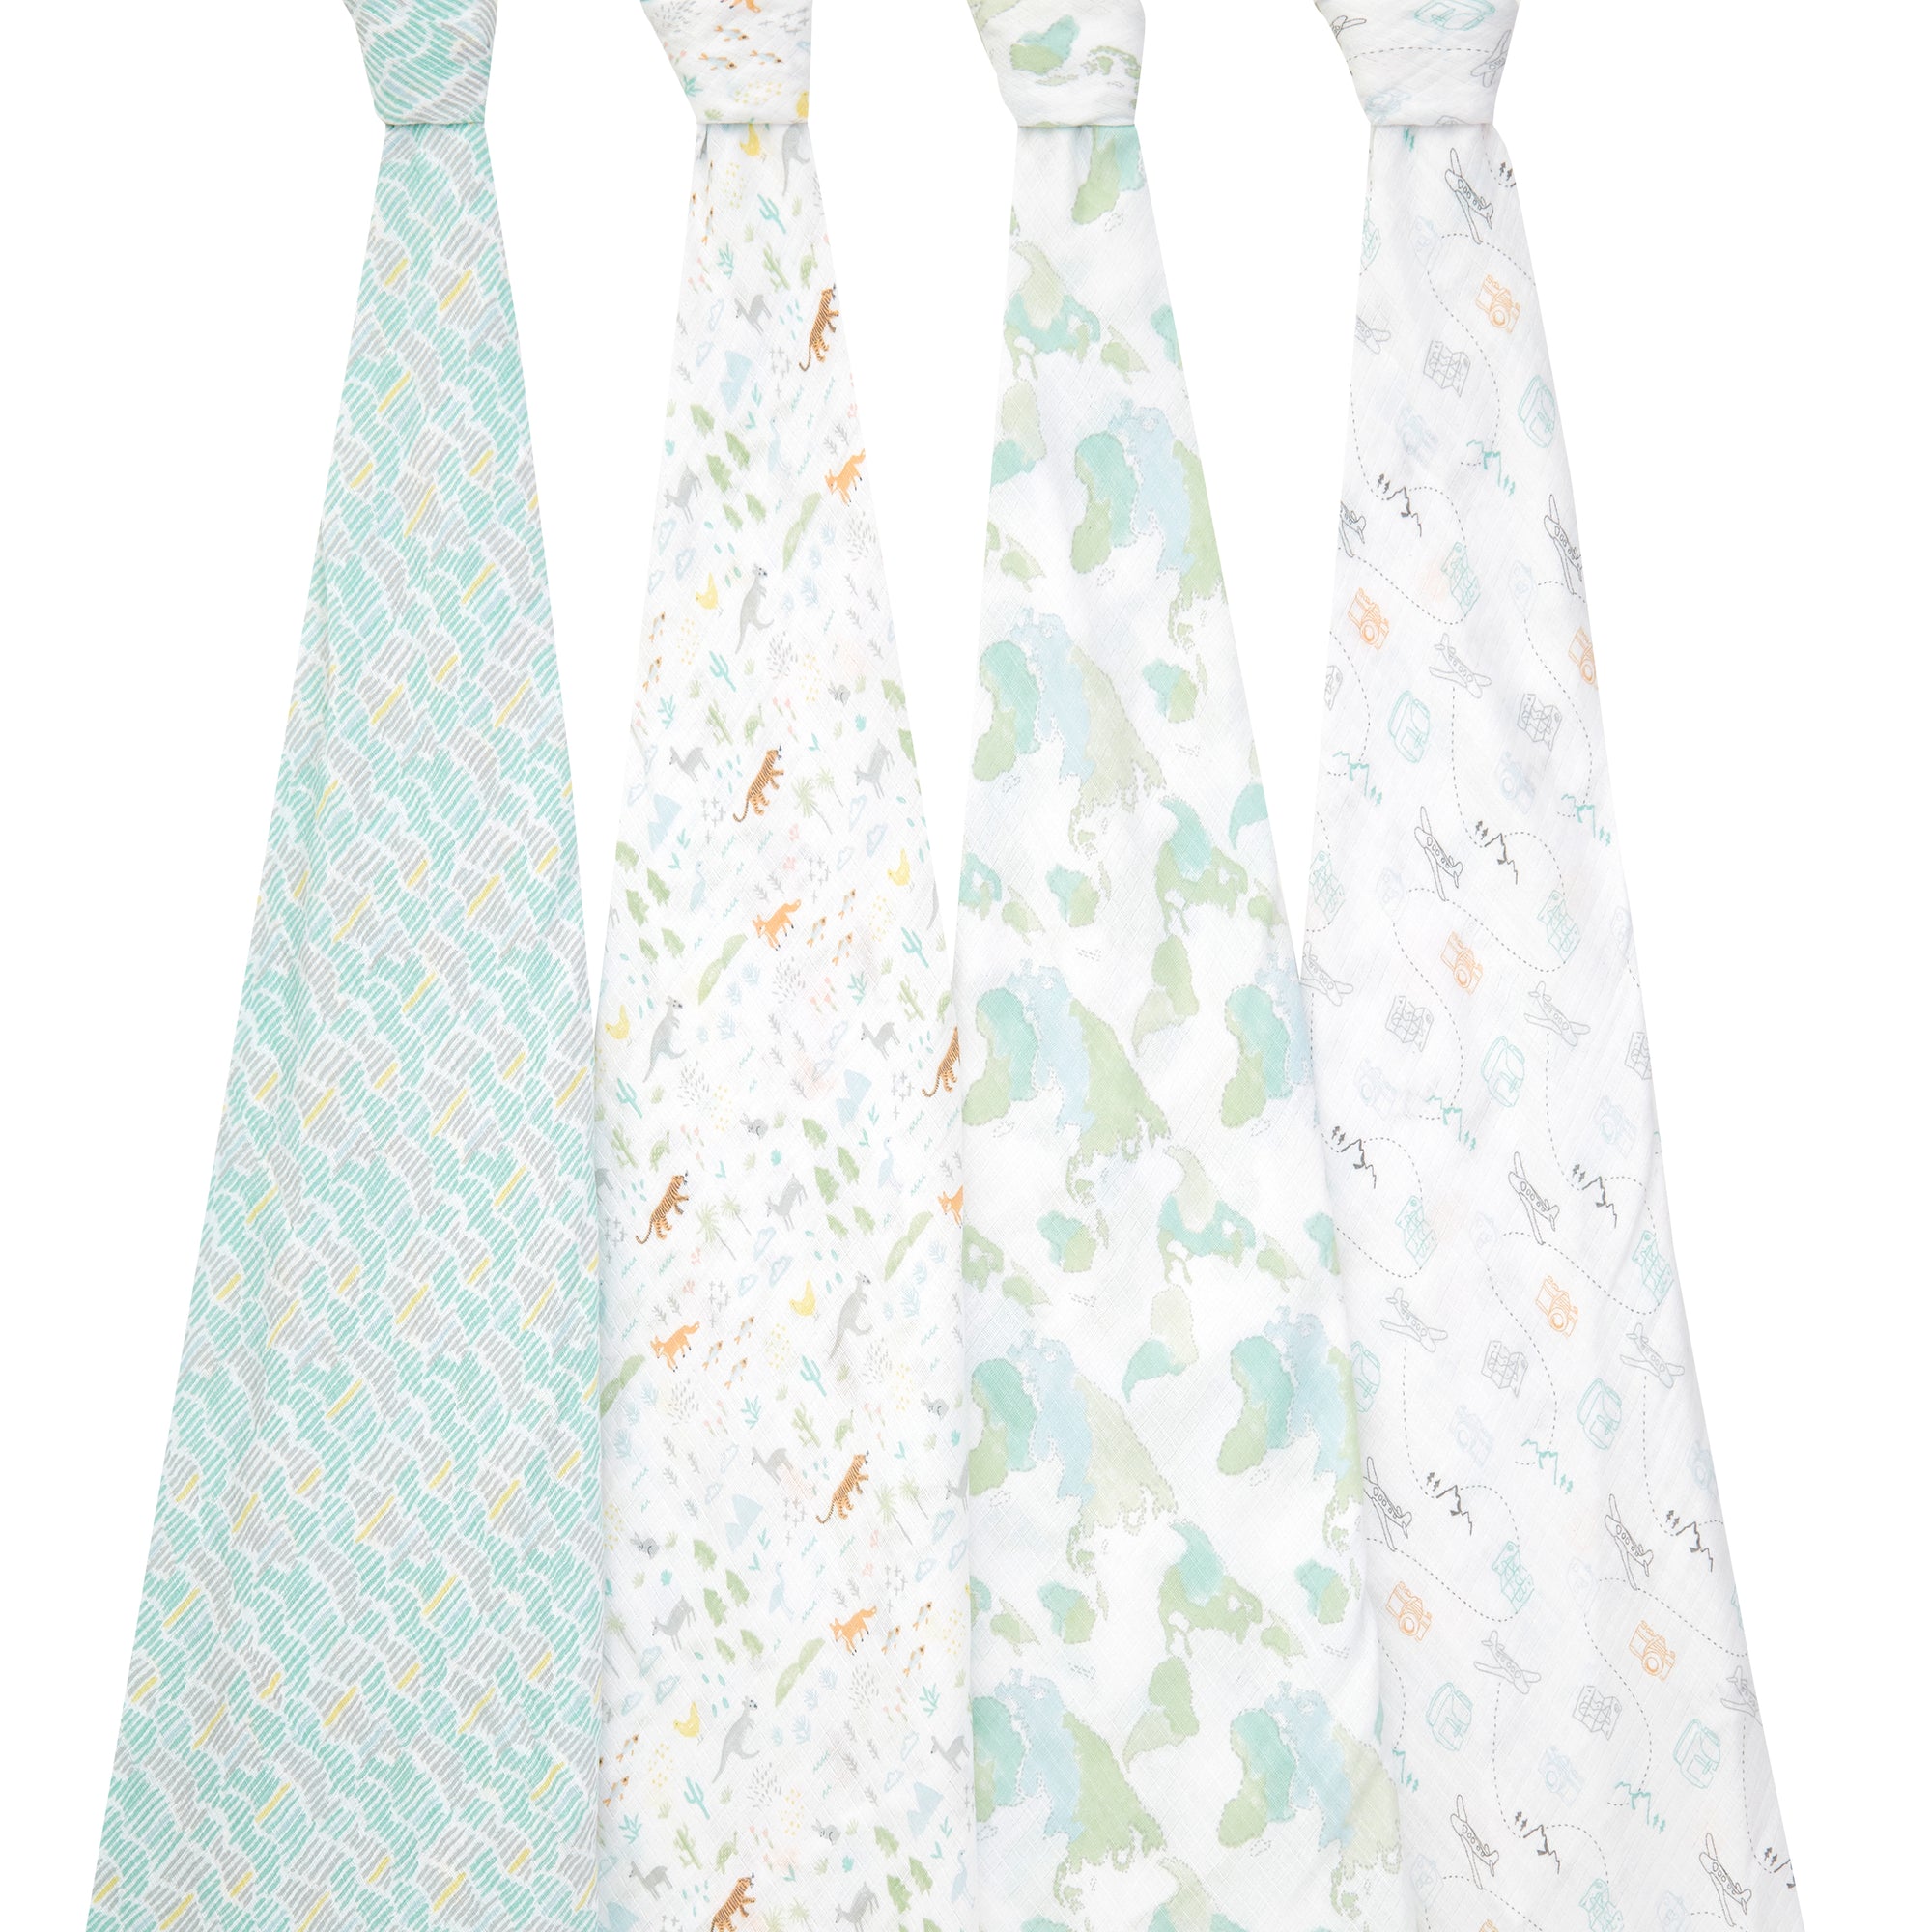 Aden + Anais voyager ESSENTIALS CLASSIC 4-pack swaddles